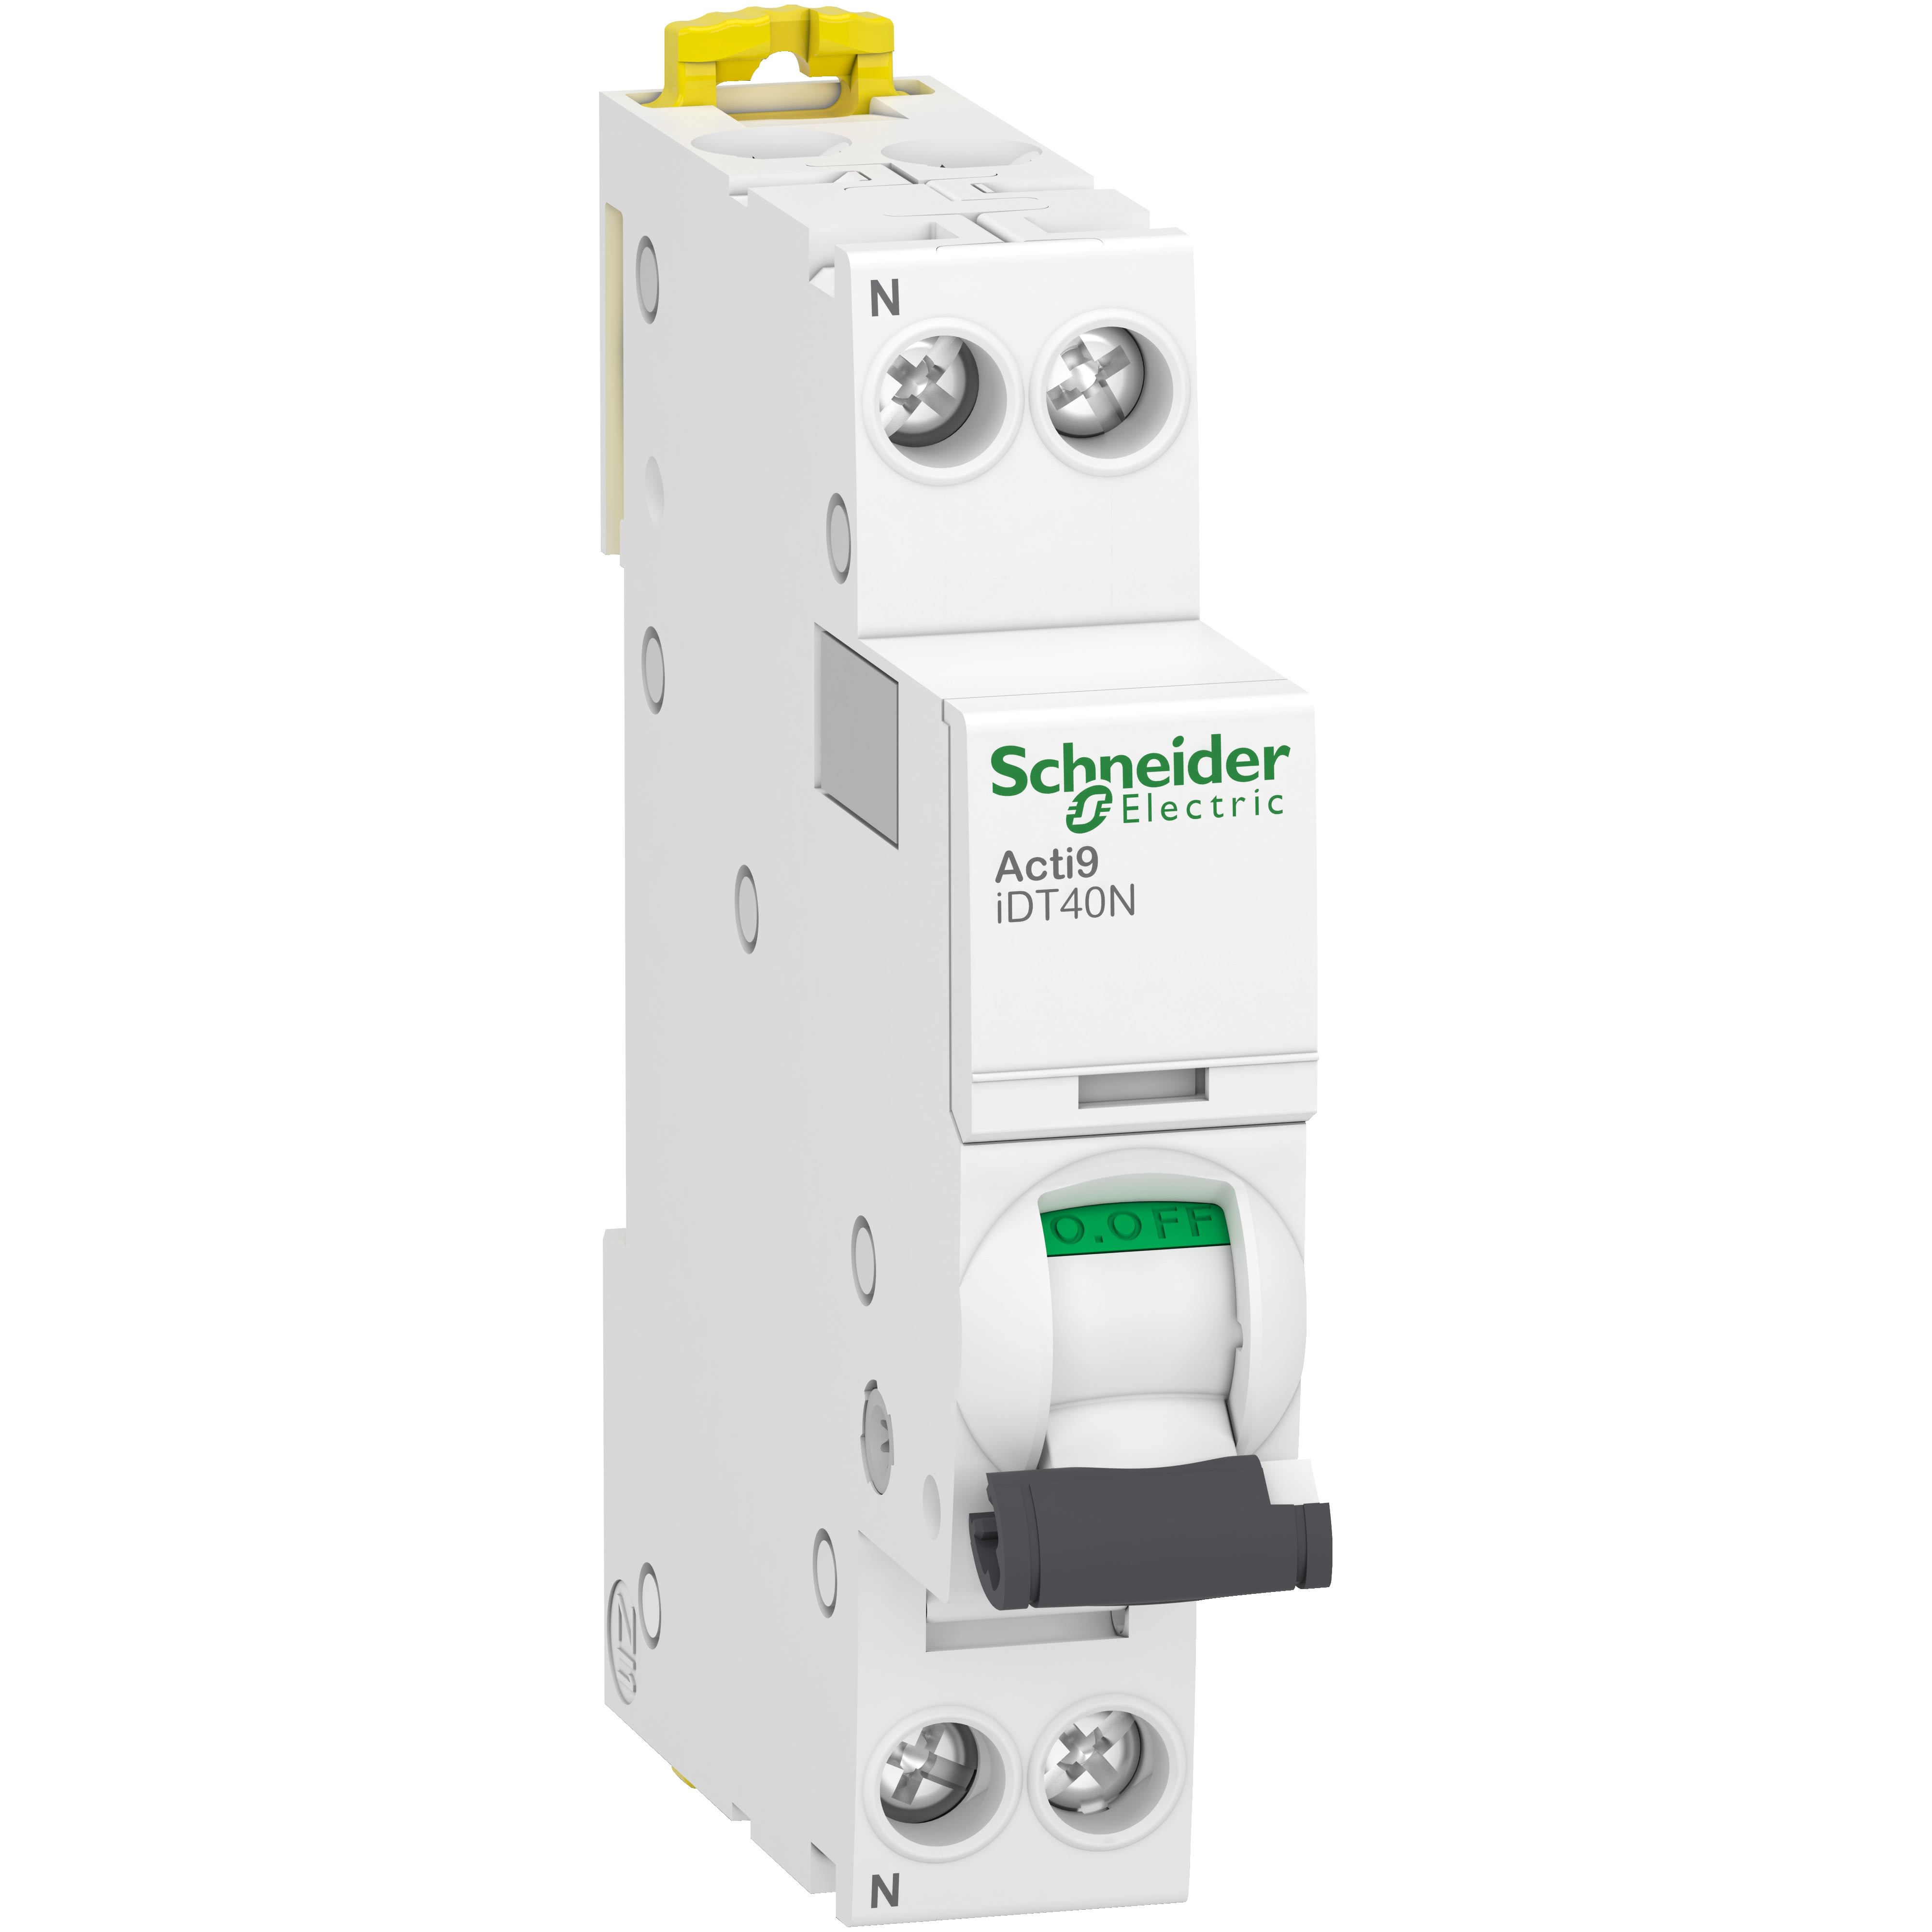 Schneider Electric - Acti9 iDT40N - Disjoncteur modulaire - 1P+N - 20A - Courbe C - 6000A-10kA